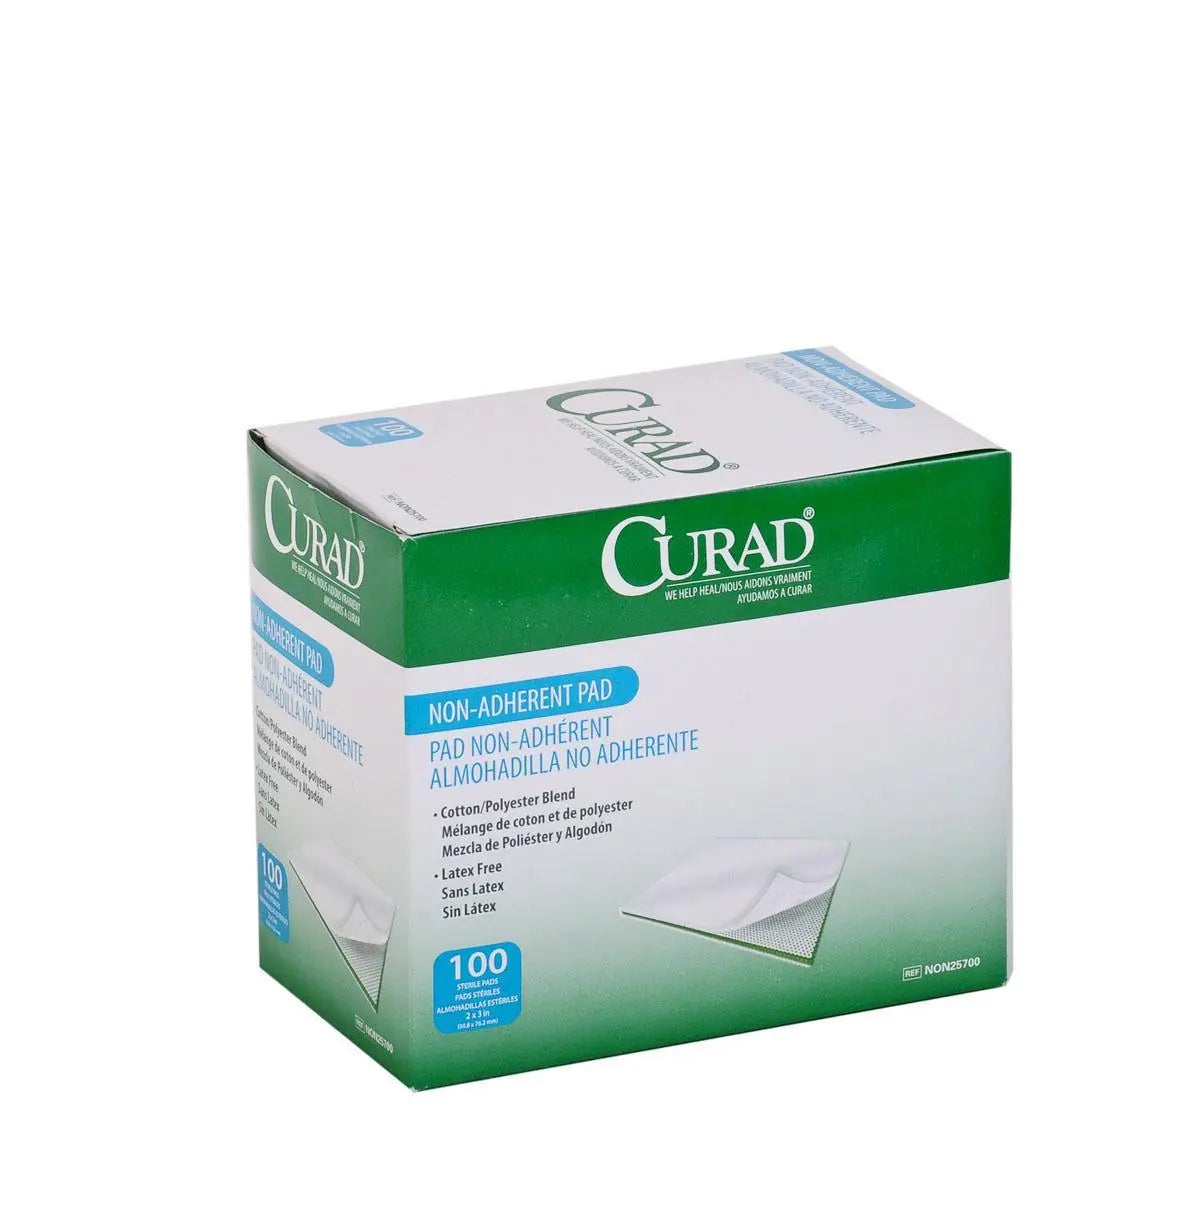 MDL NON25700 BX/100 CURAD STERILE NON ADHERENT PADS, 2" X 3"